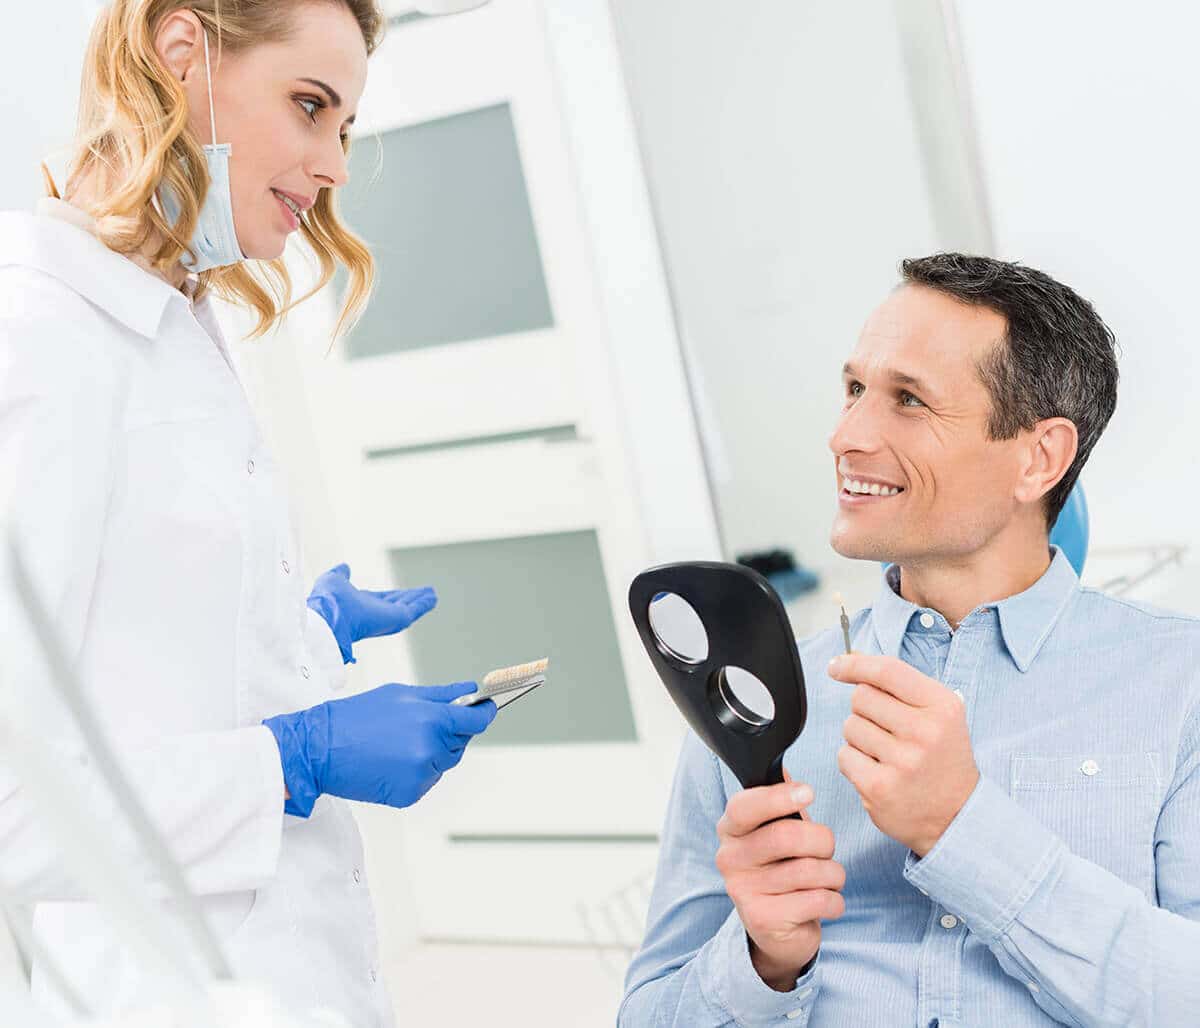 Dentist in Philadelphia, PA Area Offers Dental Implant Placement and Restoration